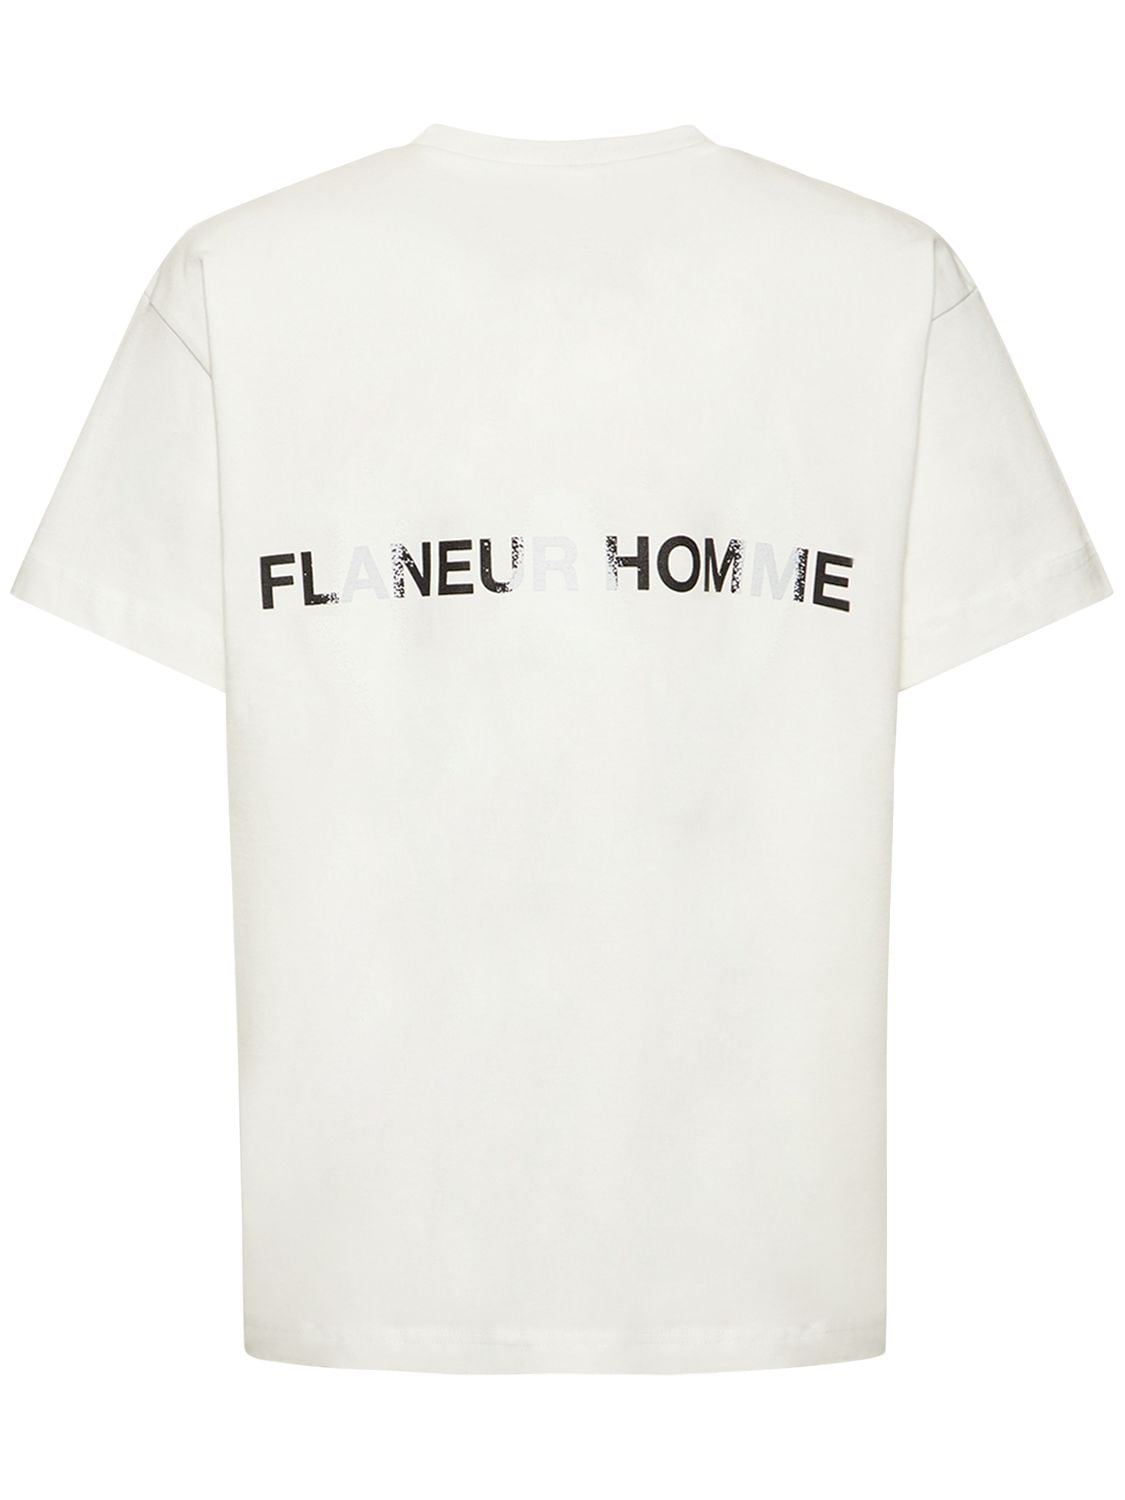 Flaneur Homme Peace Logo Cotton Jersey T-shirt In White